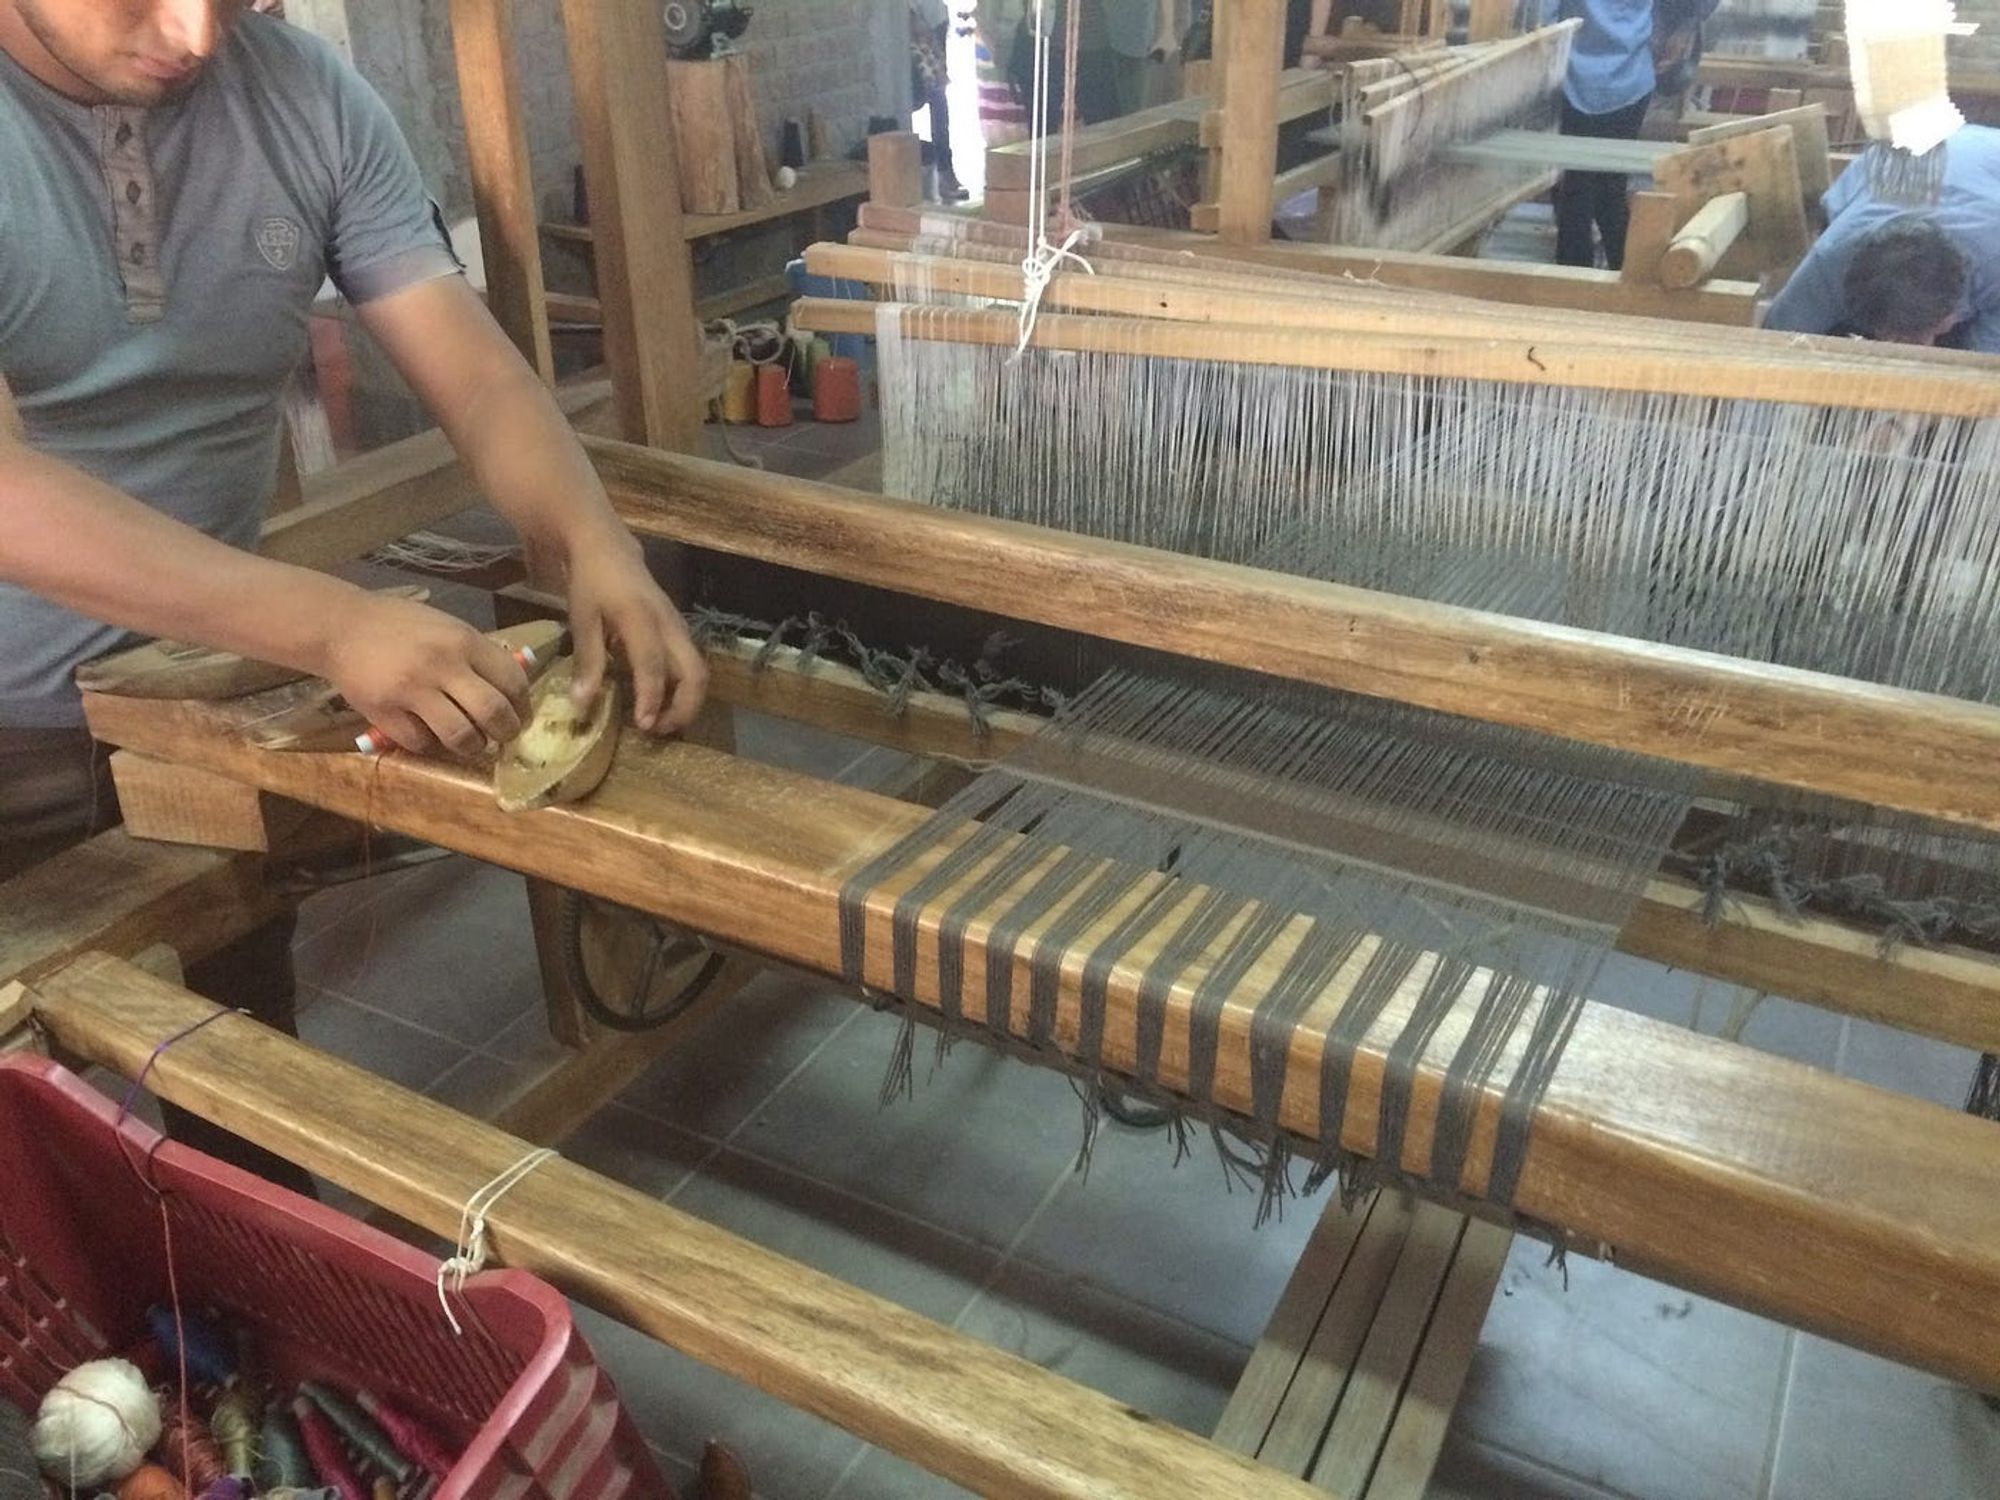 The loom I played around with in Ica.